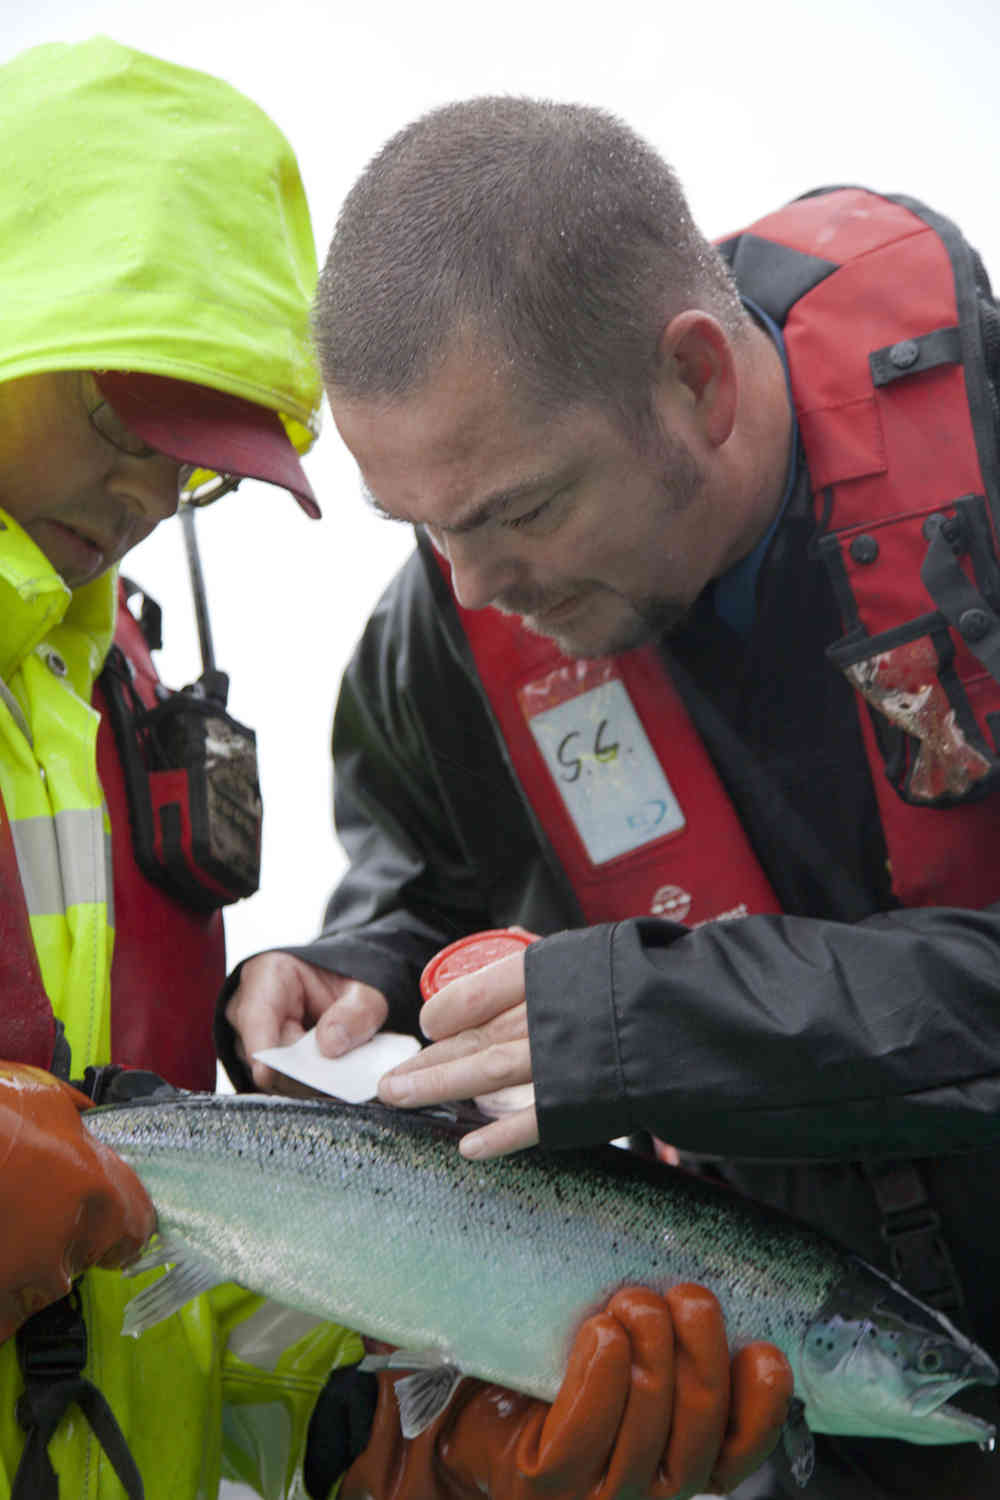 The Norwegian Food Safety Authority inspects fish farms along the whole coast.